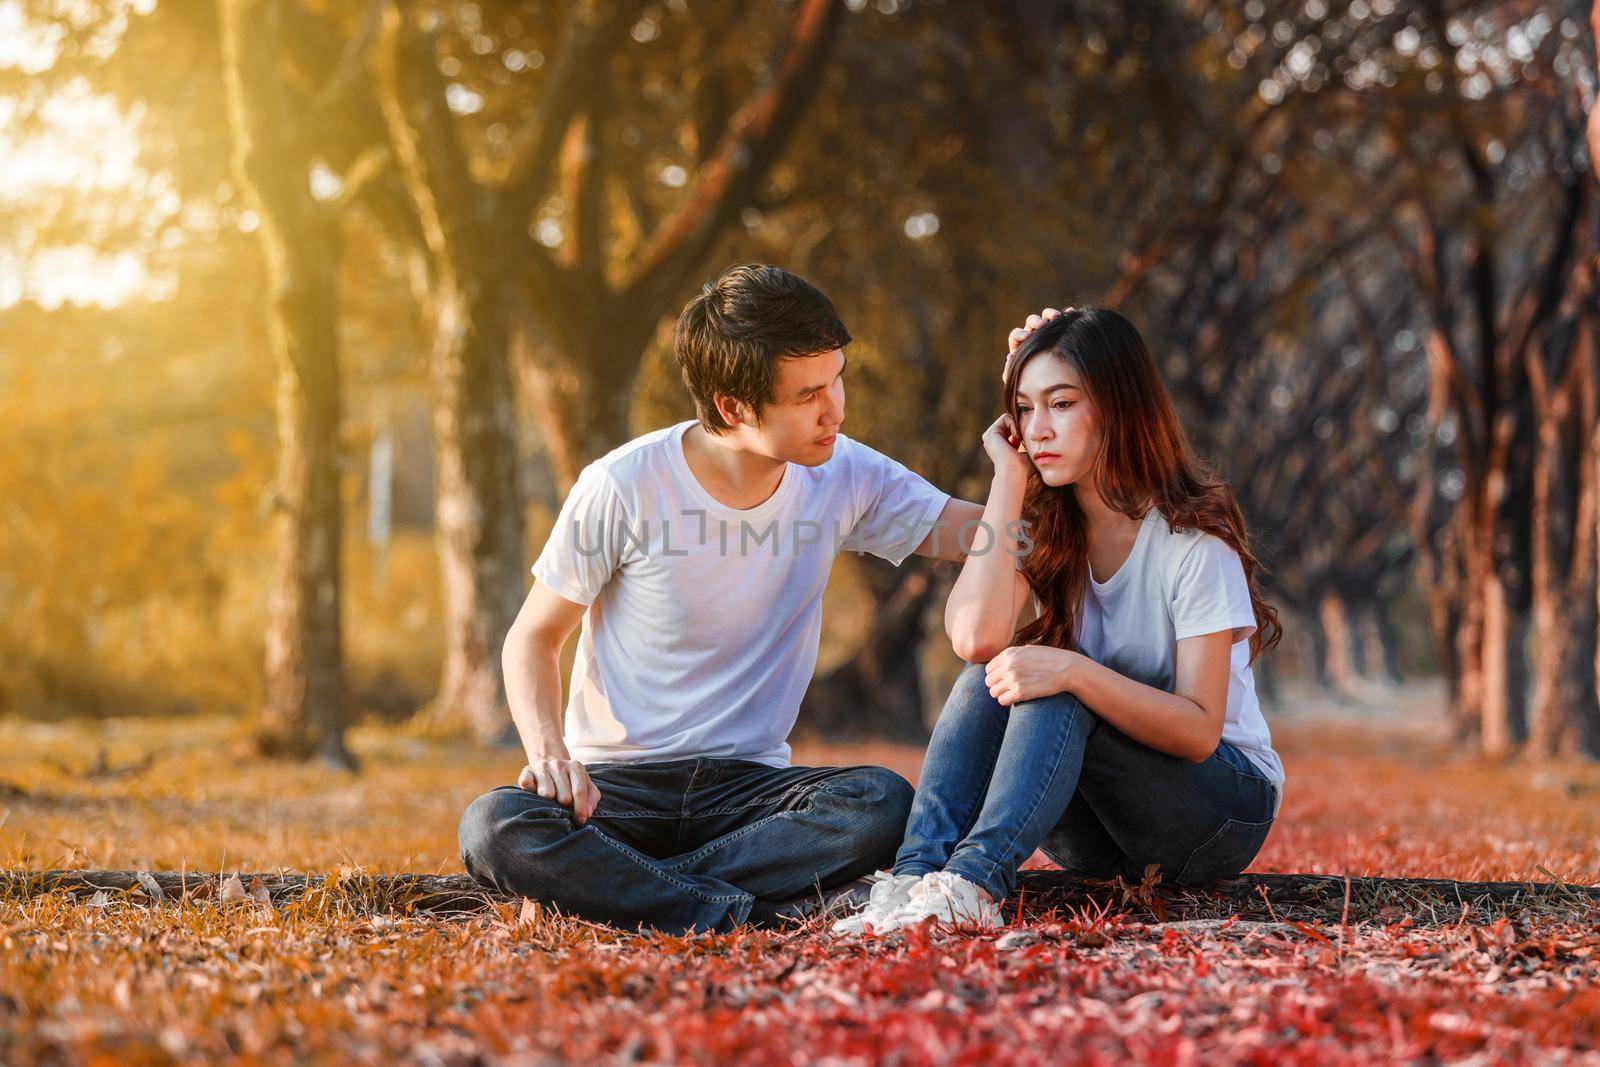 unhappy woman sitting with a concerned guy comforting her in the park